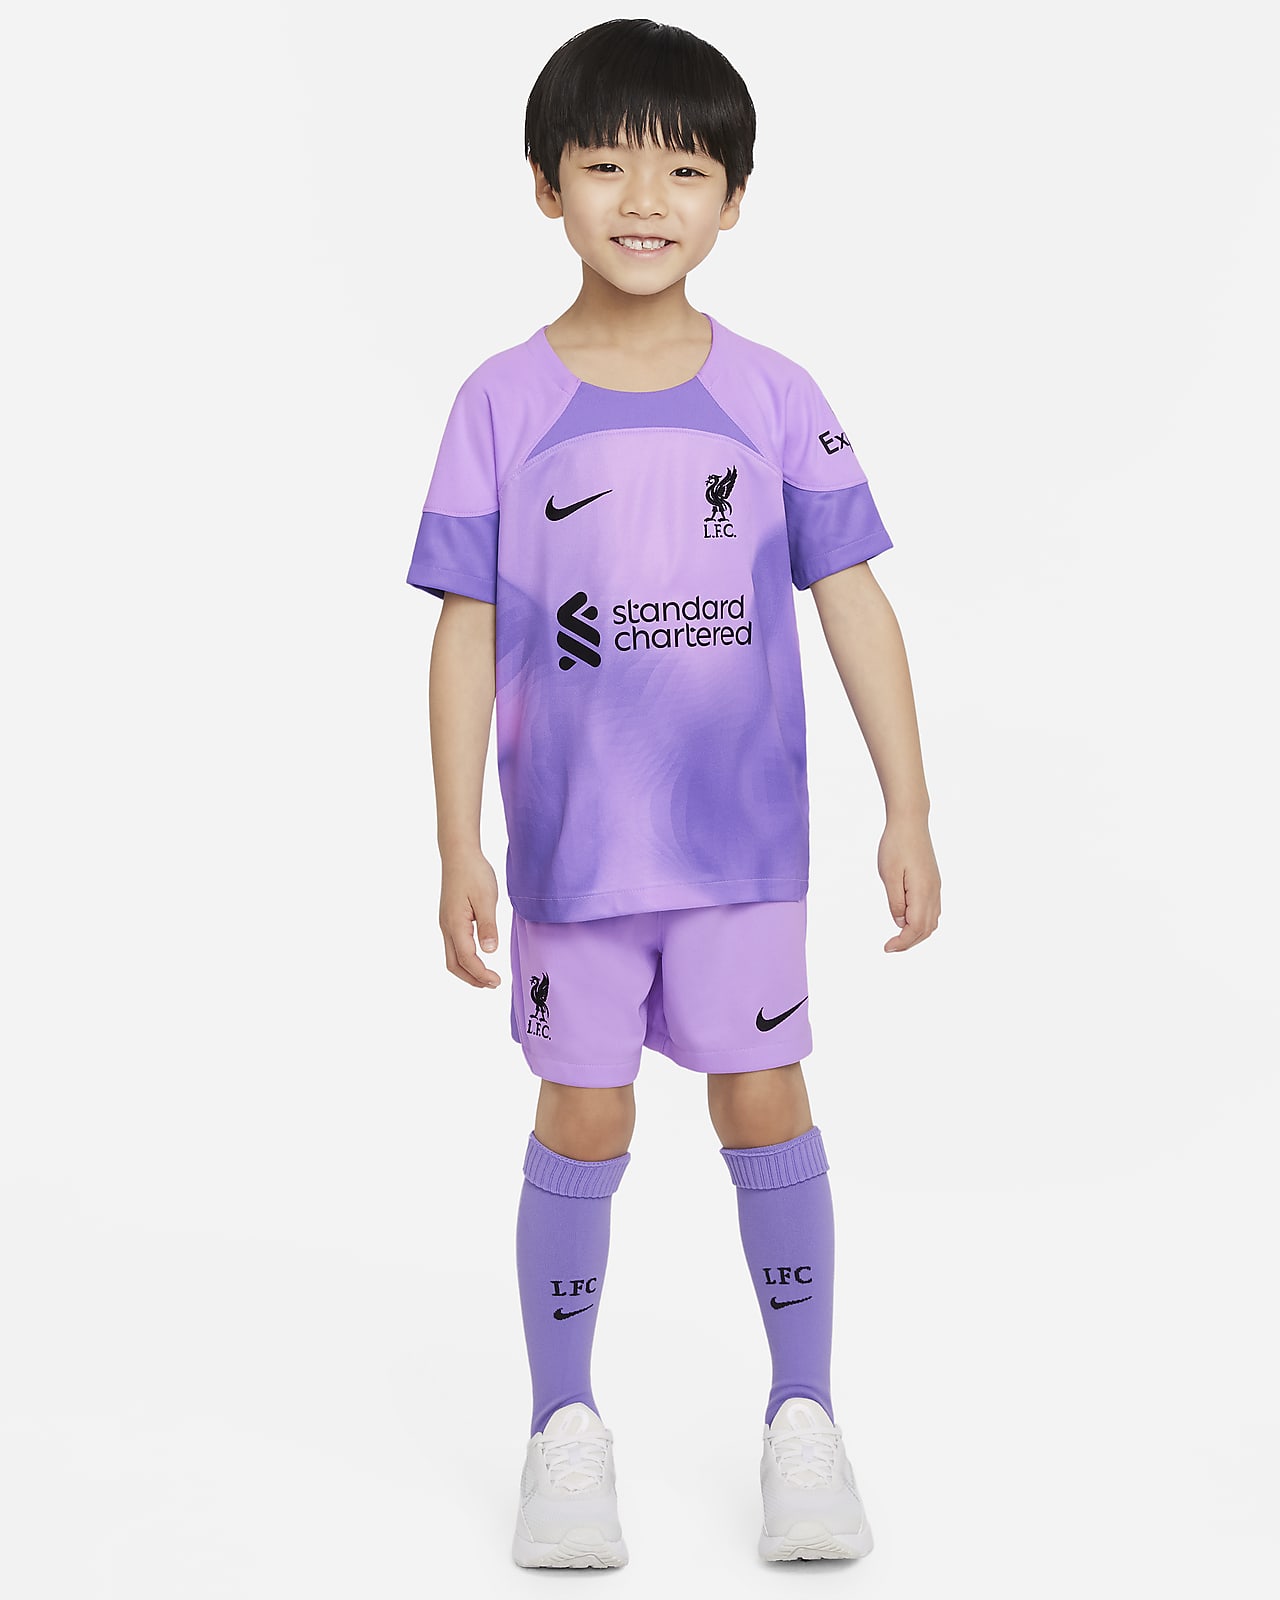 short LIVERPOOL LFC Set jersey Official collection Child boy size 